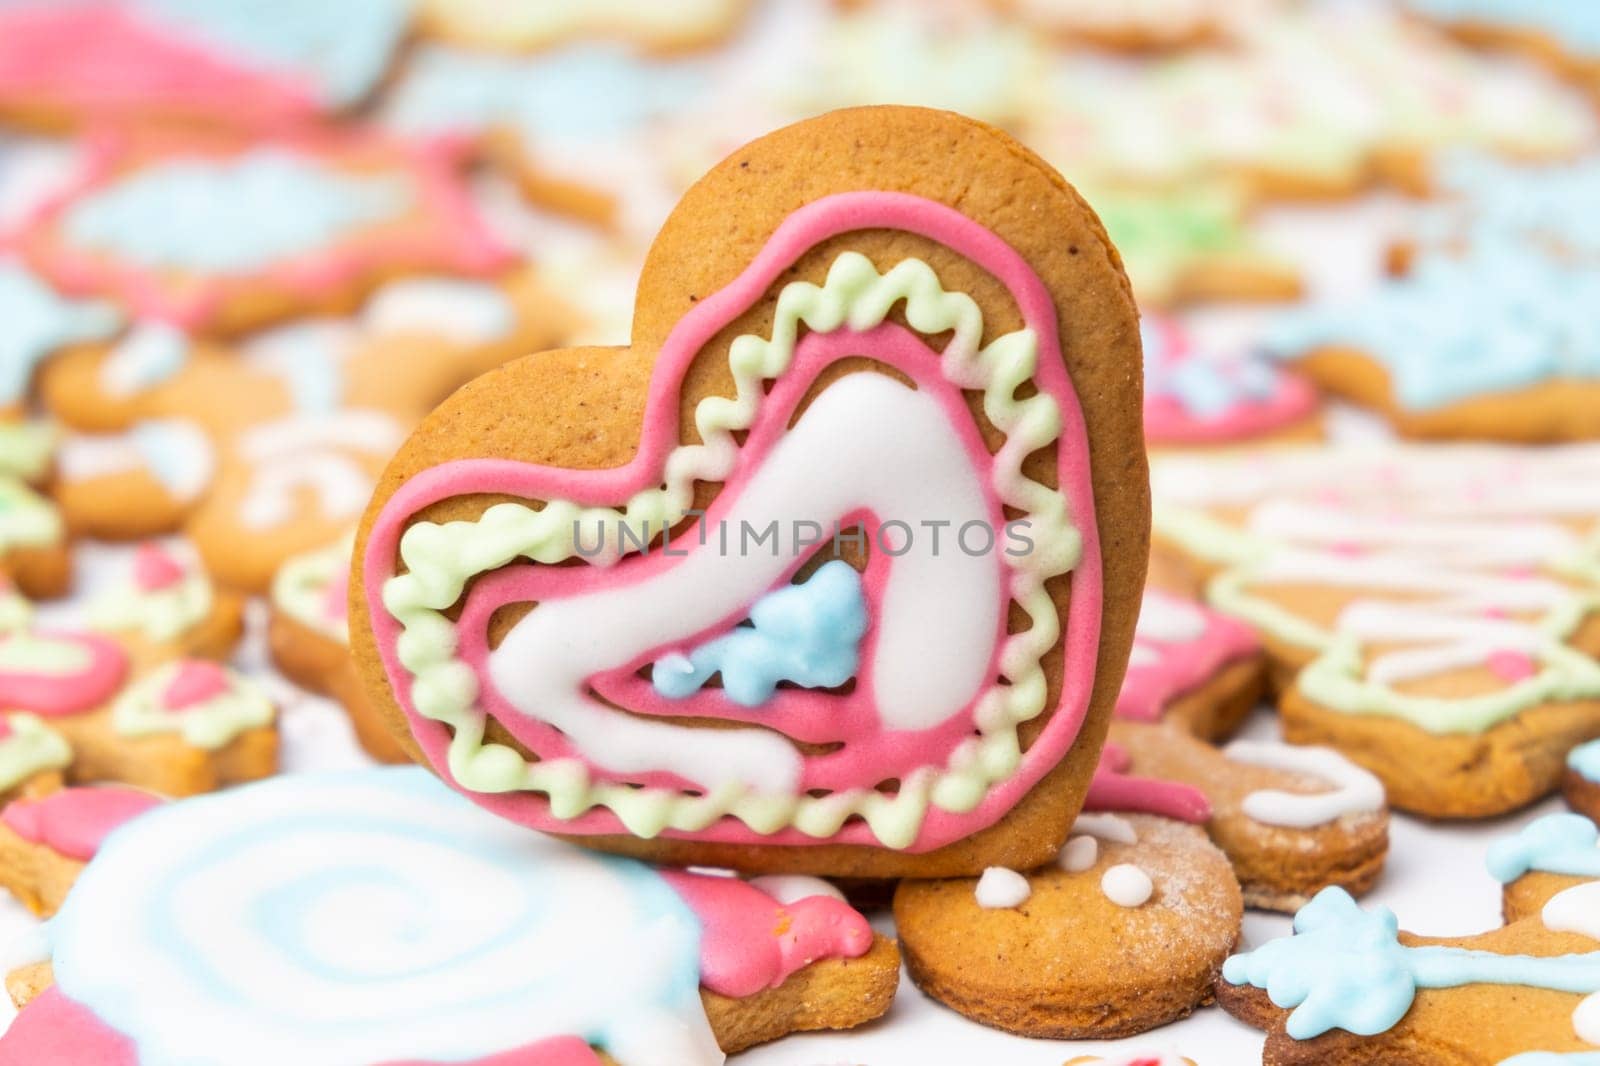 Heart shaped sugar cookies for St Valentines Day with colorful icing by vladimka